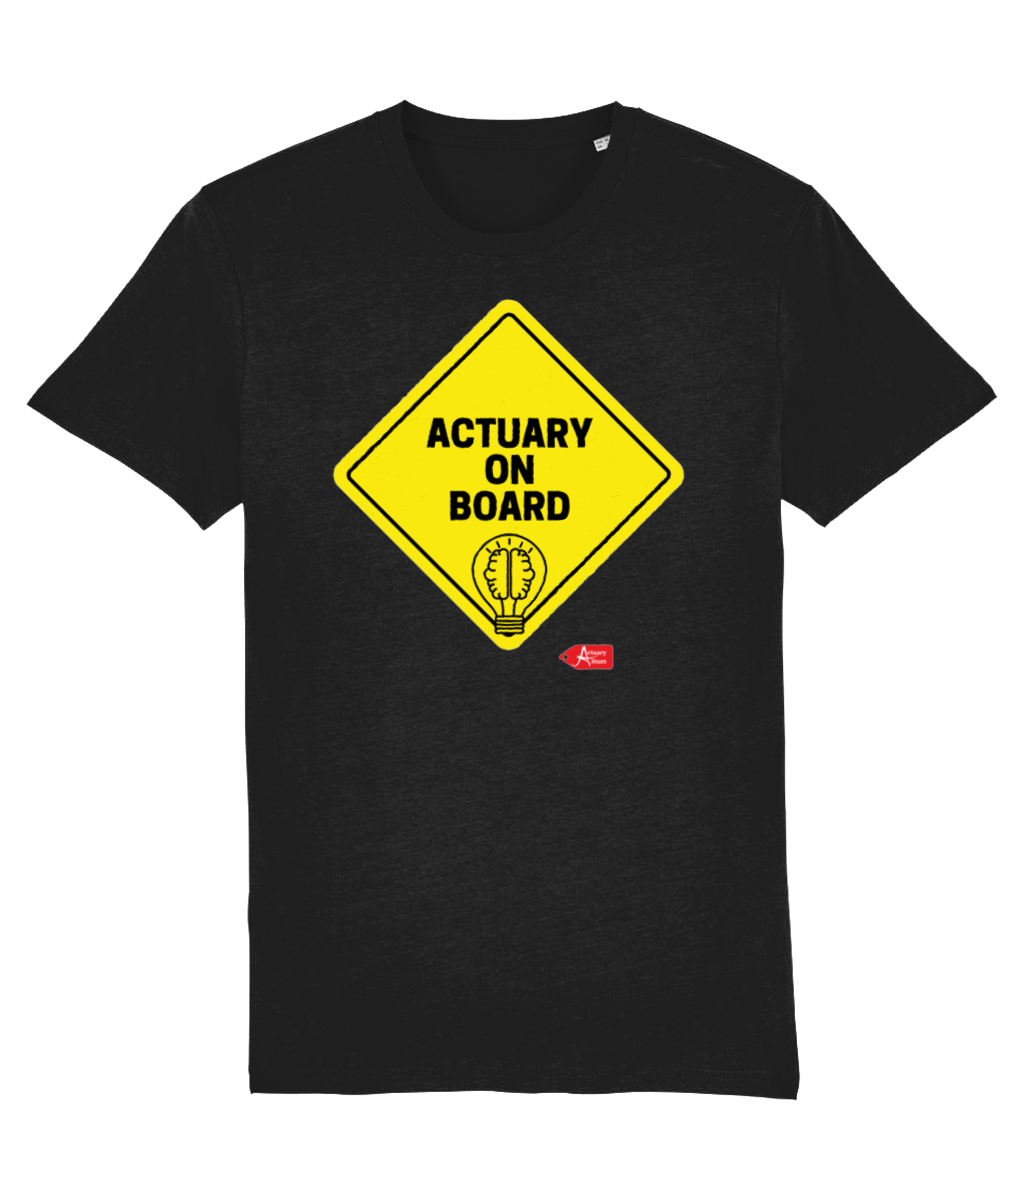 Actuary On Board T-Shirt (Black and White Variant)